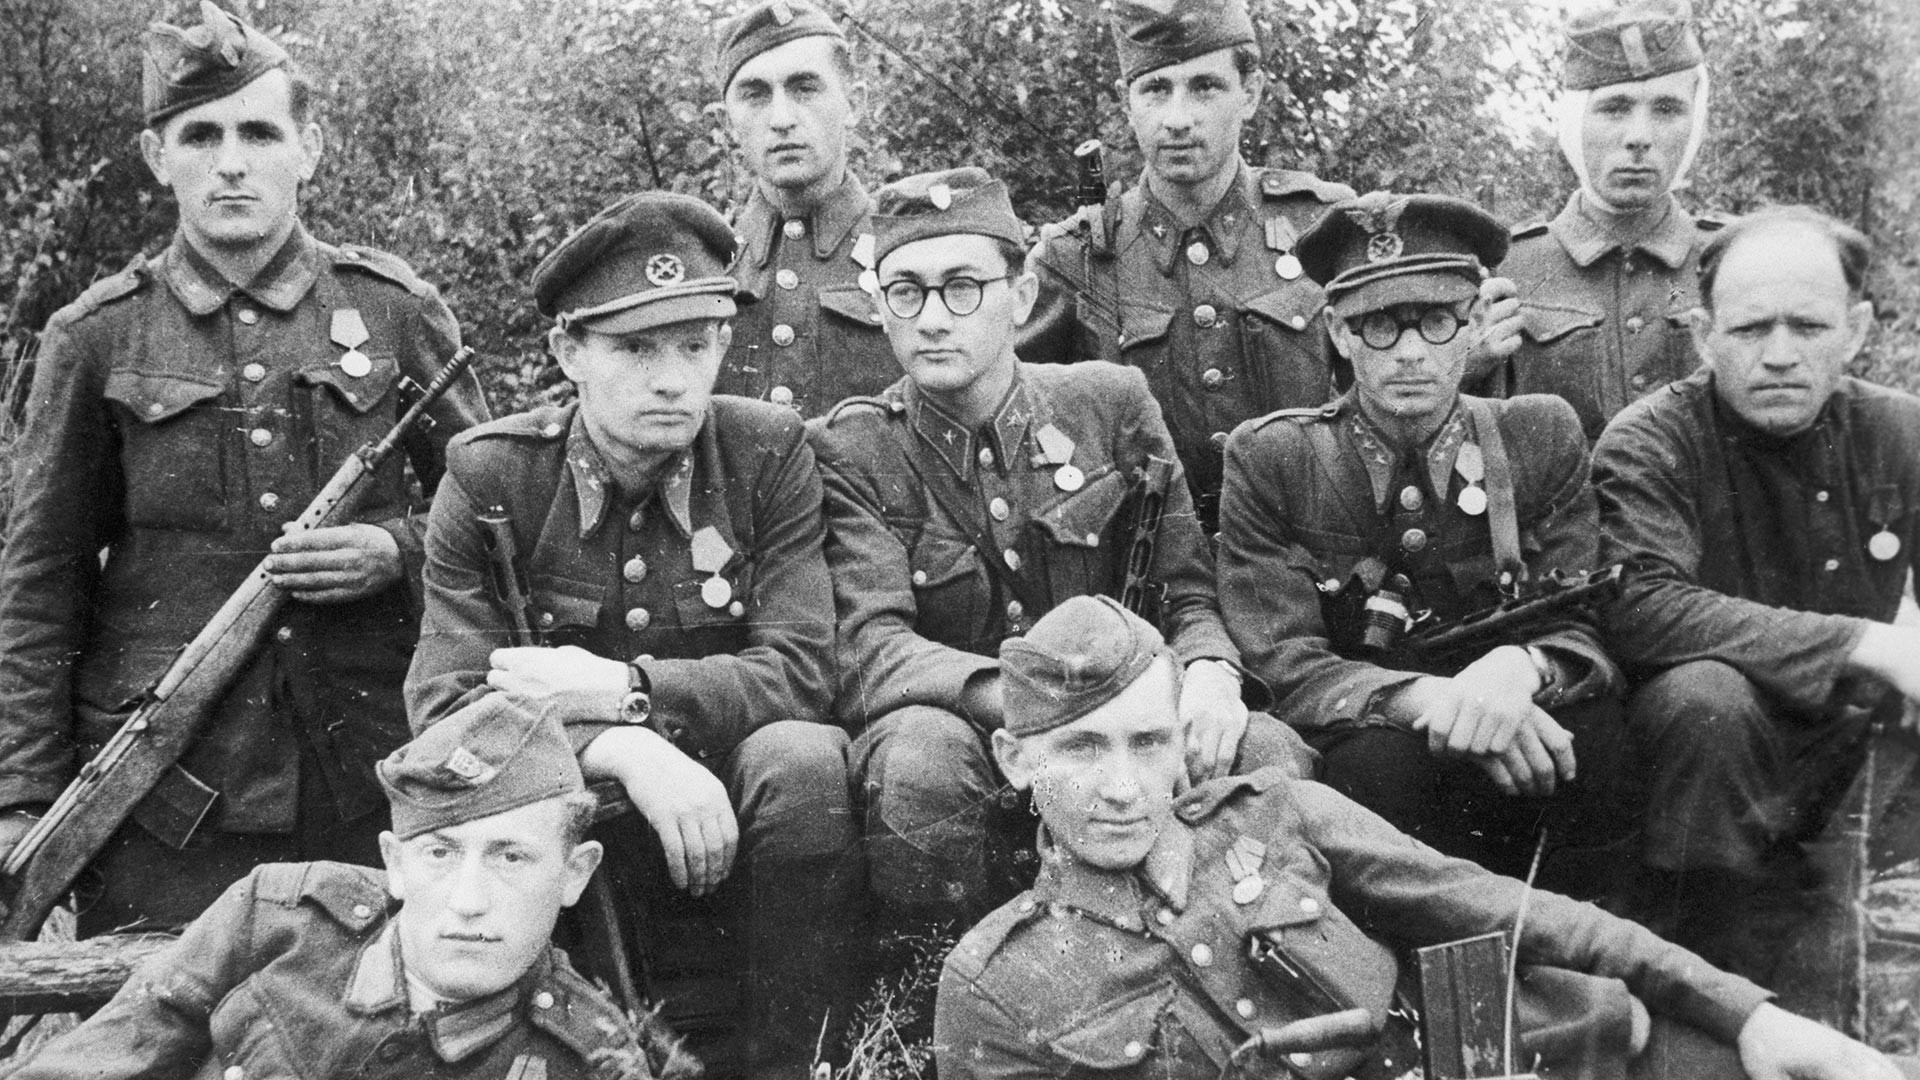 Slovak soldiers who defected to the side of the Soviet partisans.